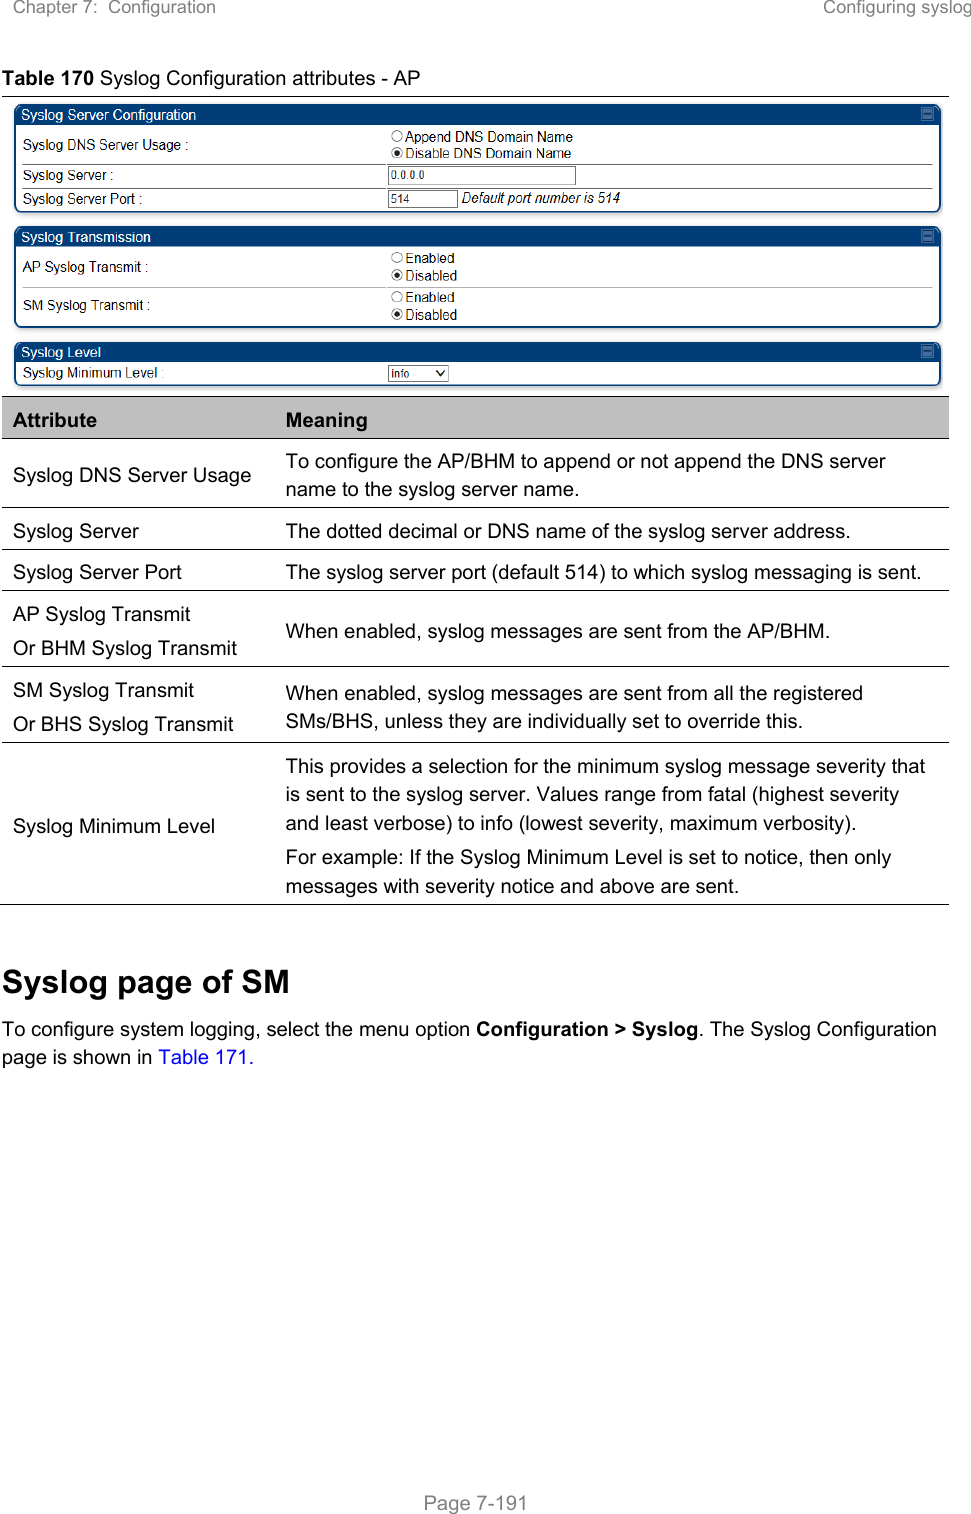 Chapter 7:  Configuration  Configuring syslog   Page 7-191 Table 170 Syslog Configuration attributes - AP Attribute  Meaning Syslog DNS Server Usage   To configure the AP/BHM to append or not append the DNS server name to the syslog server name.  Syslog Server   The dotted decimal or DNS name of the syslog server address.  Syslog Server Port   The syslog server port (default 514) to which syslog messaging is sent.  AP Syslog Transmit  Or BHM Syslog Transmit  When enabled, syslog messages are sent from the AP/BHM. SM Syslog Transmit  Or BHS Syslog Transmit  When enabled, syslog messages are sent from all the registered SMs/BHS, unless they are individually set to override this.  Syslog Minimum Level This provides a selection for the minimum syslog message severity that is sent to the syslog server. Values range from fatal (highest severity and least verbose) to info (lowest severity, maximum verbosity). For example: If the Syslog Minimum Level is set to notice, then only messages with severity notice and above are sent.  Syslog page of SM To configure system logging, select the menu option Configuration &gt; Syslog. The Syslog Configuration page is shown in Table 171. 